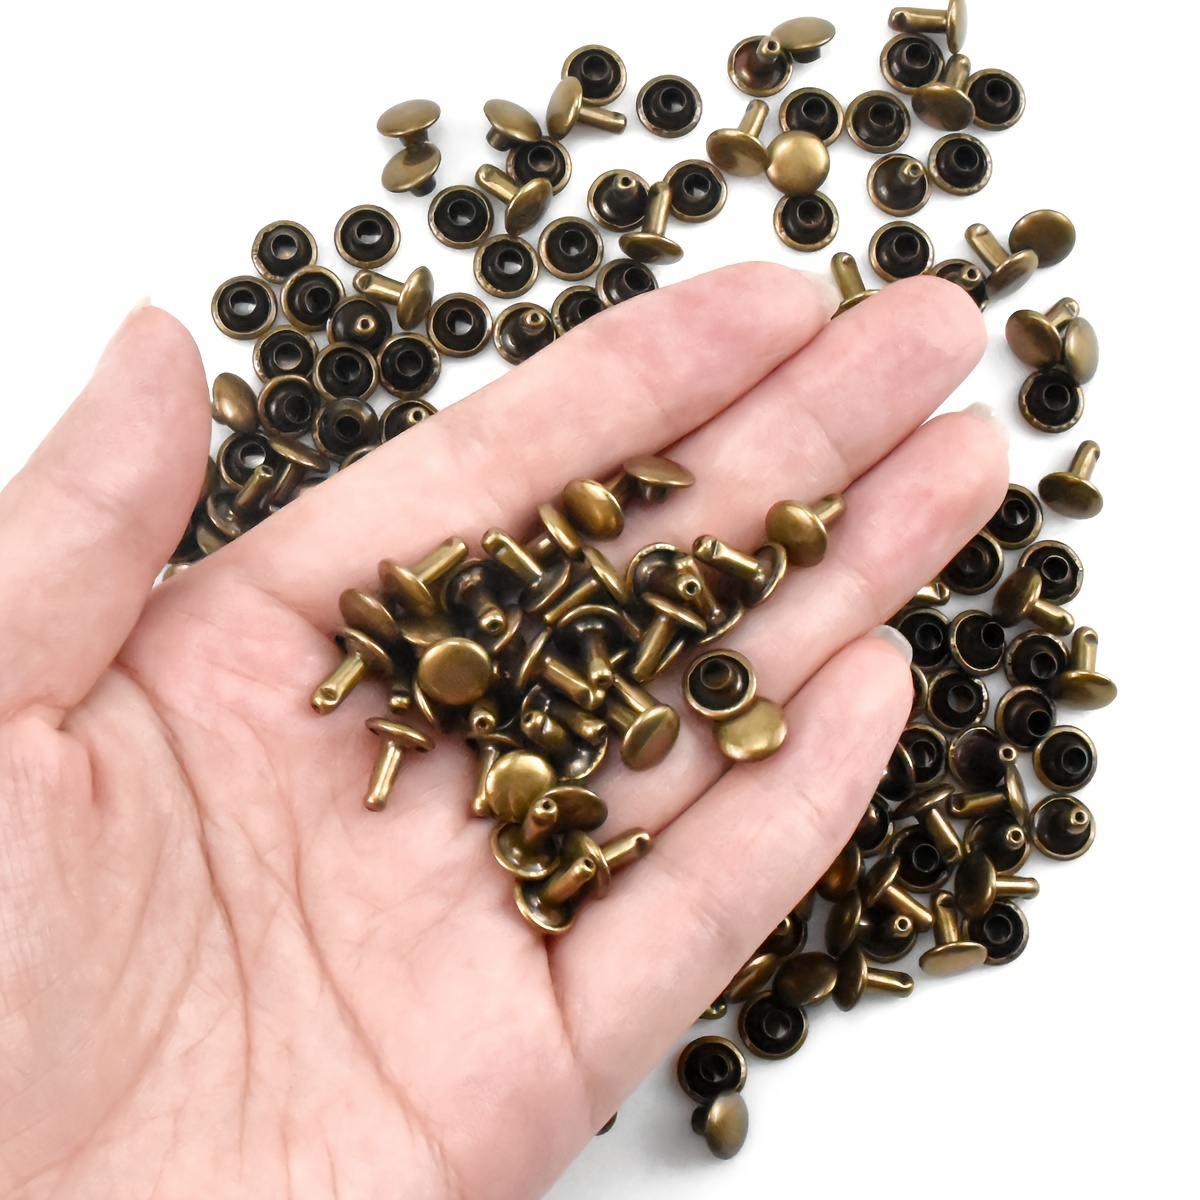 100Pcs/Set 6mm-12mm Metal Round Double Cap Rivets Studs Nail For